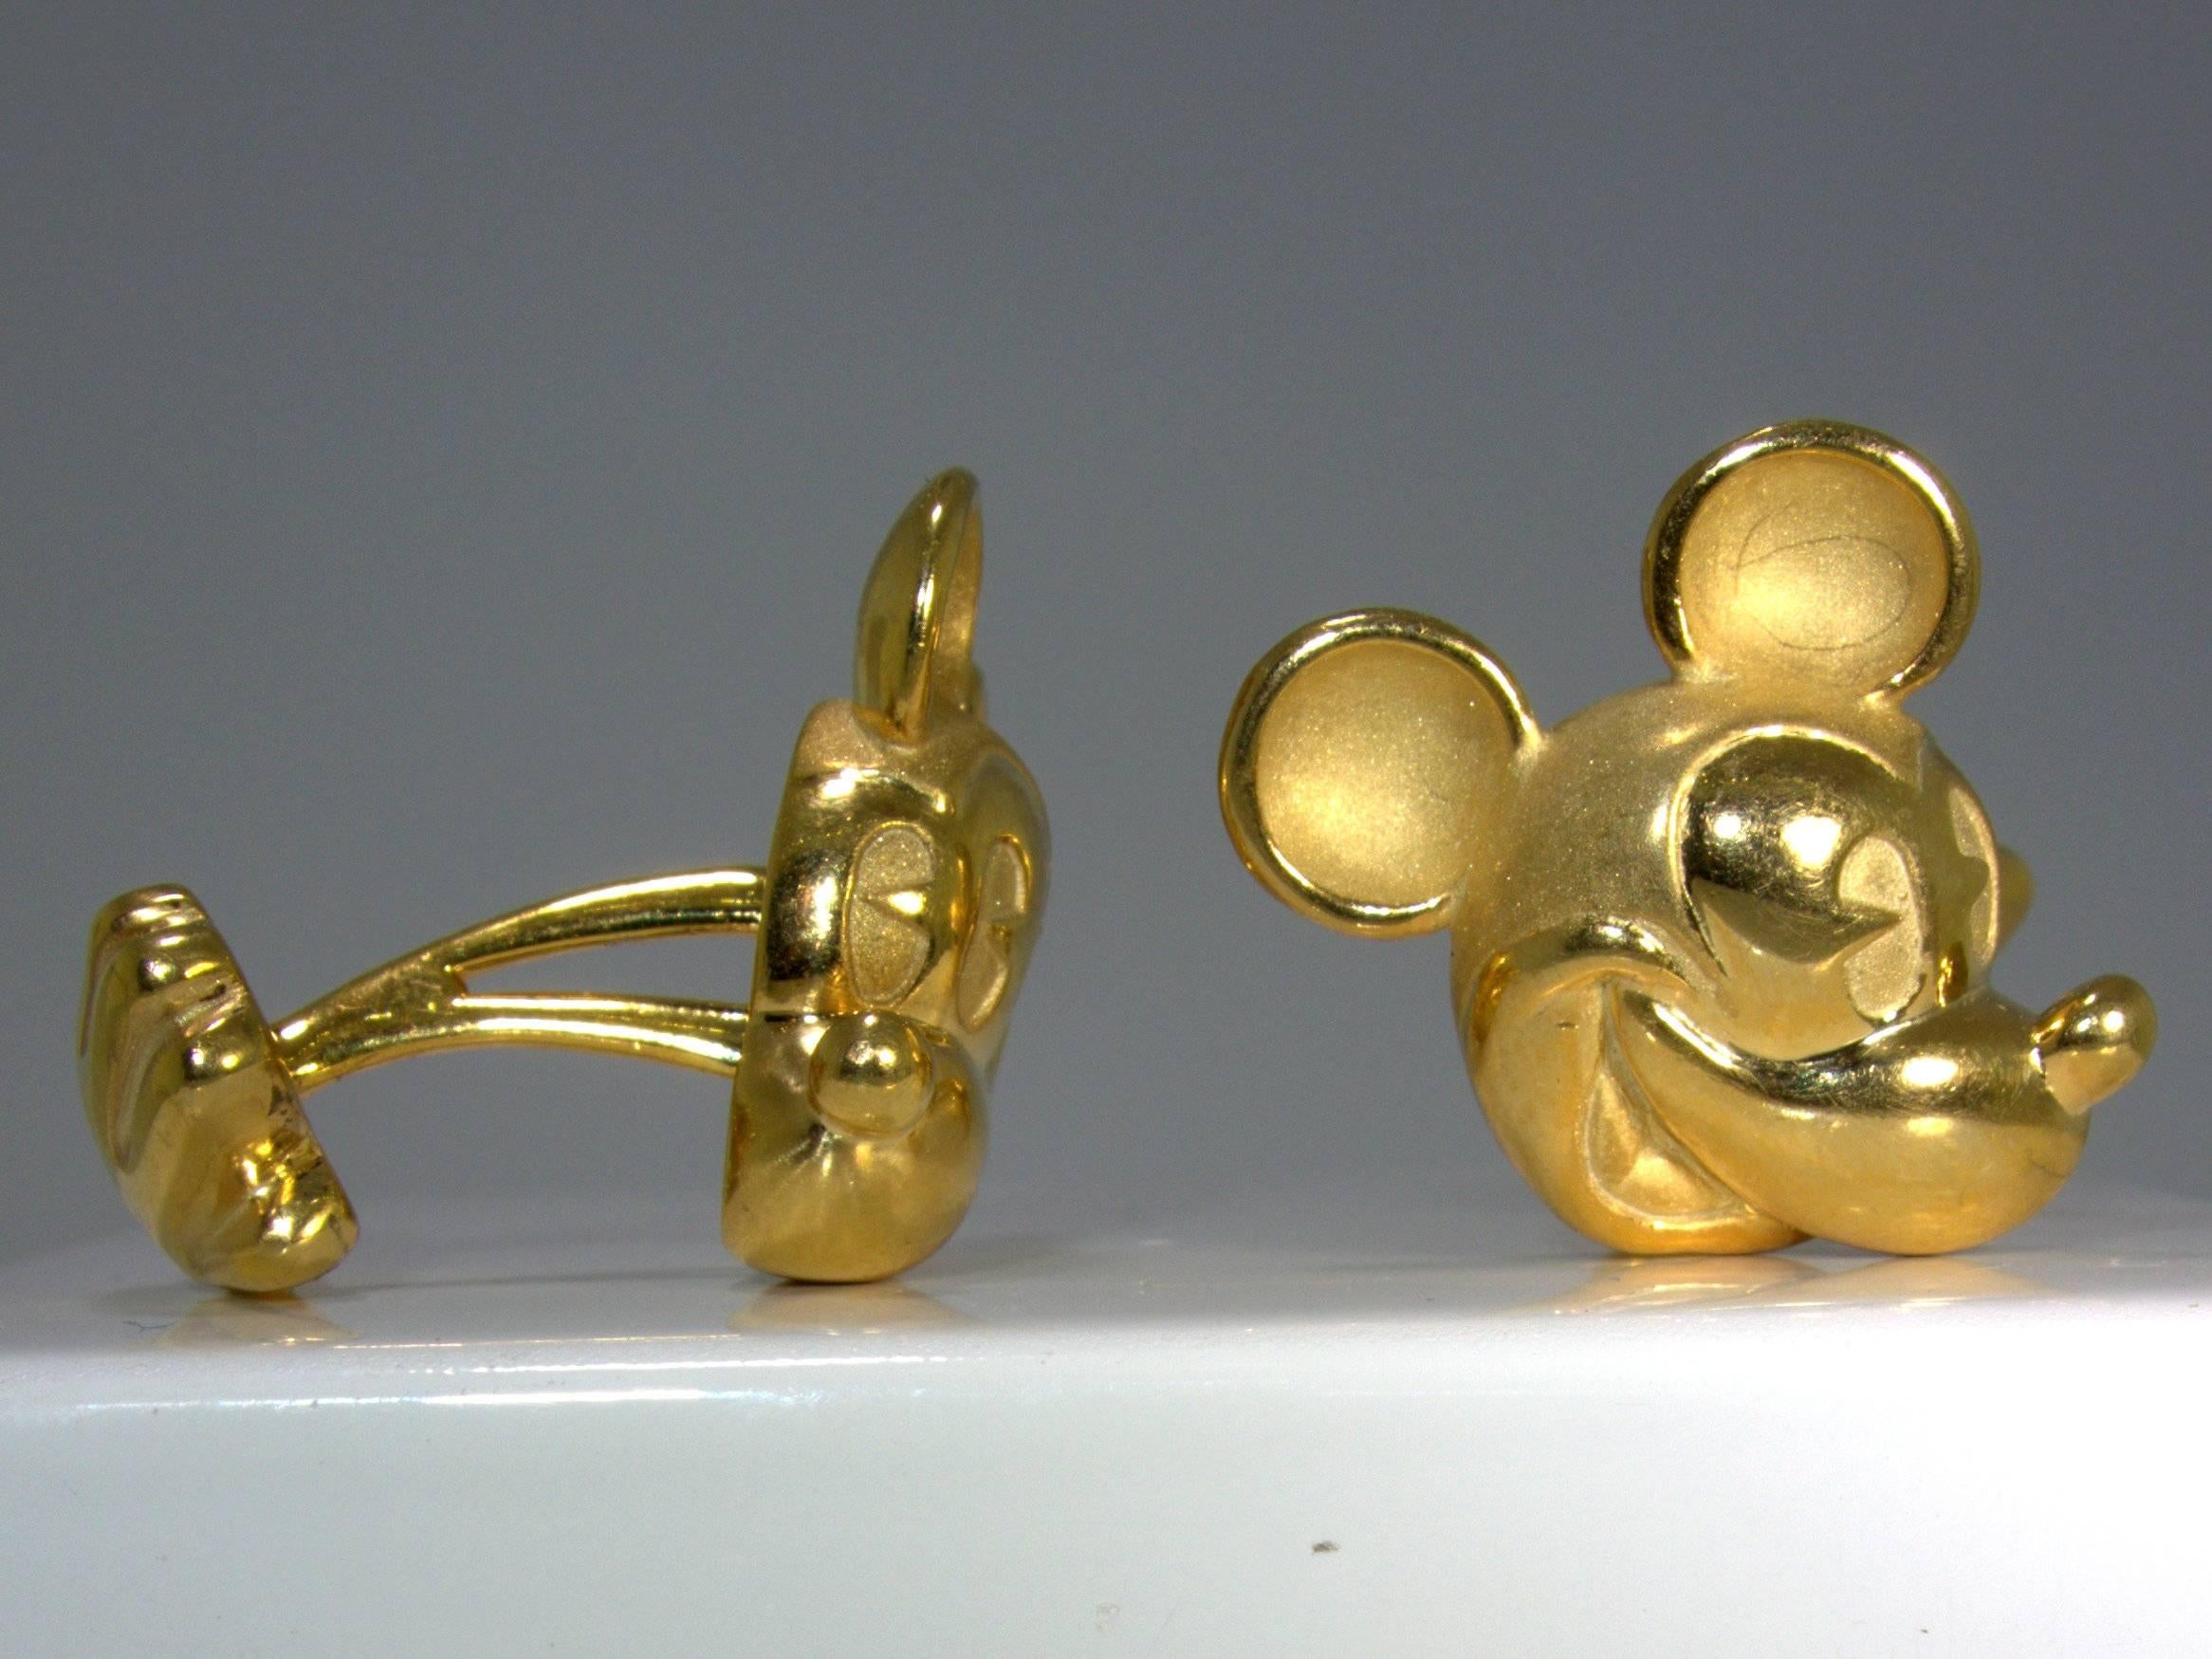 Signed Jose Hess and Disney (he probably made these for Disney),14K Micky Mouse cufflinks, with one side his head and the other his hand.  These charming links are well made and an unusual find on the market today by a master goldsmith.
